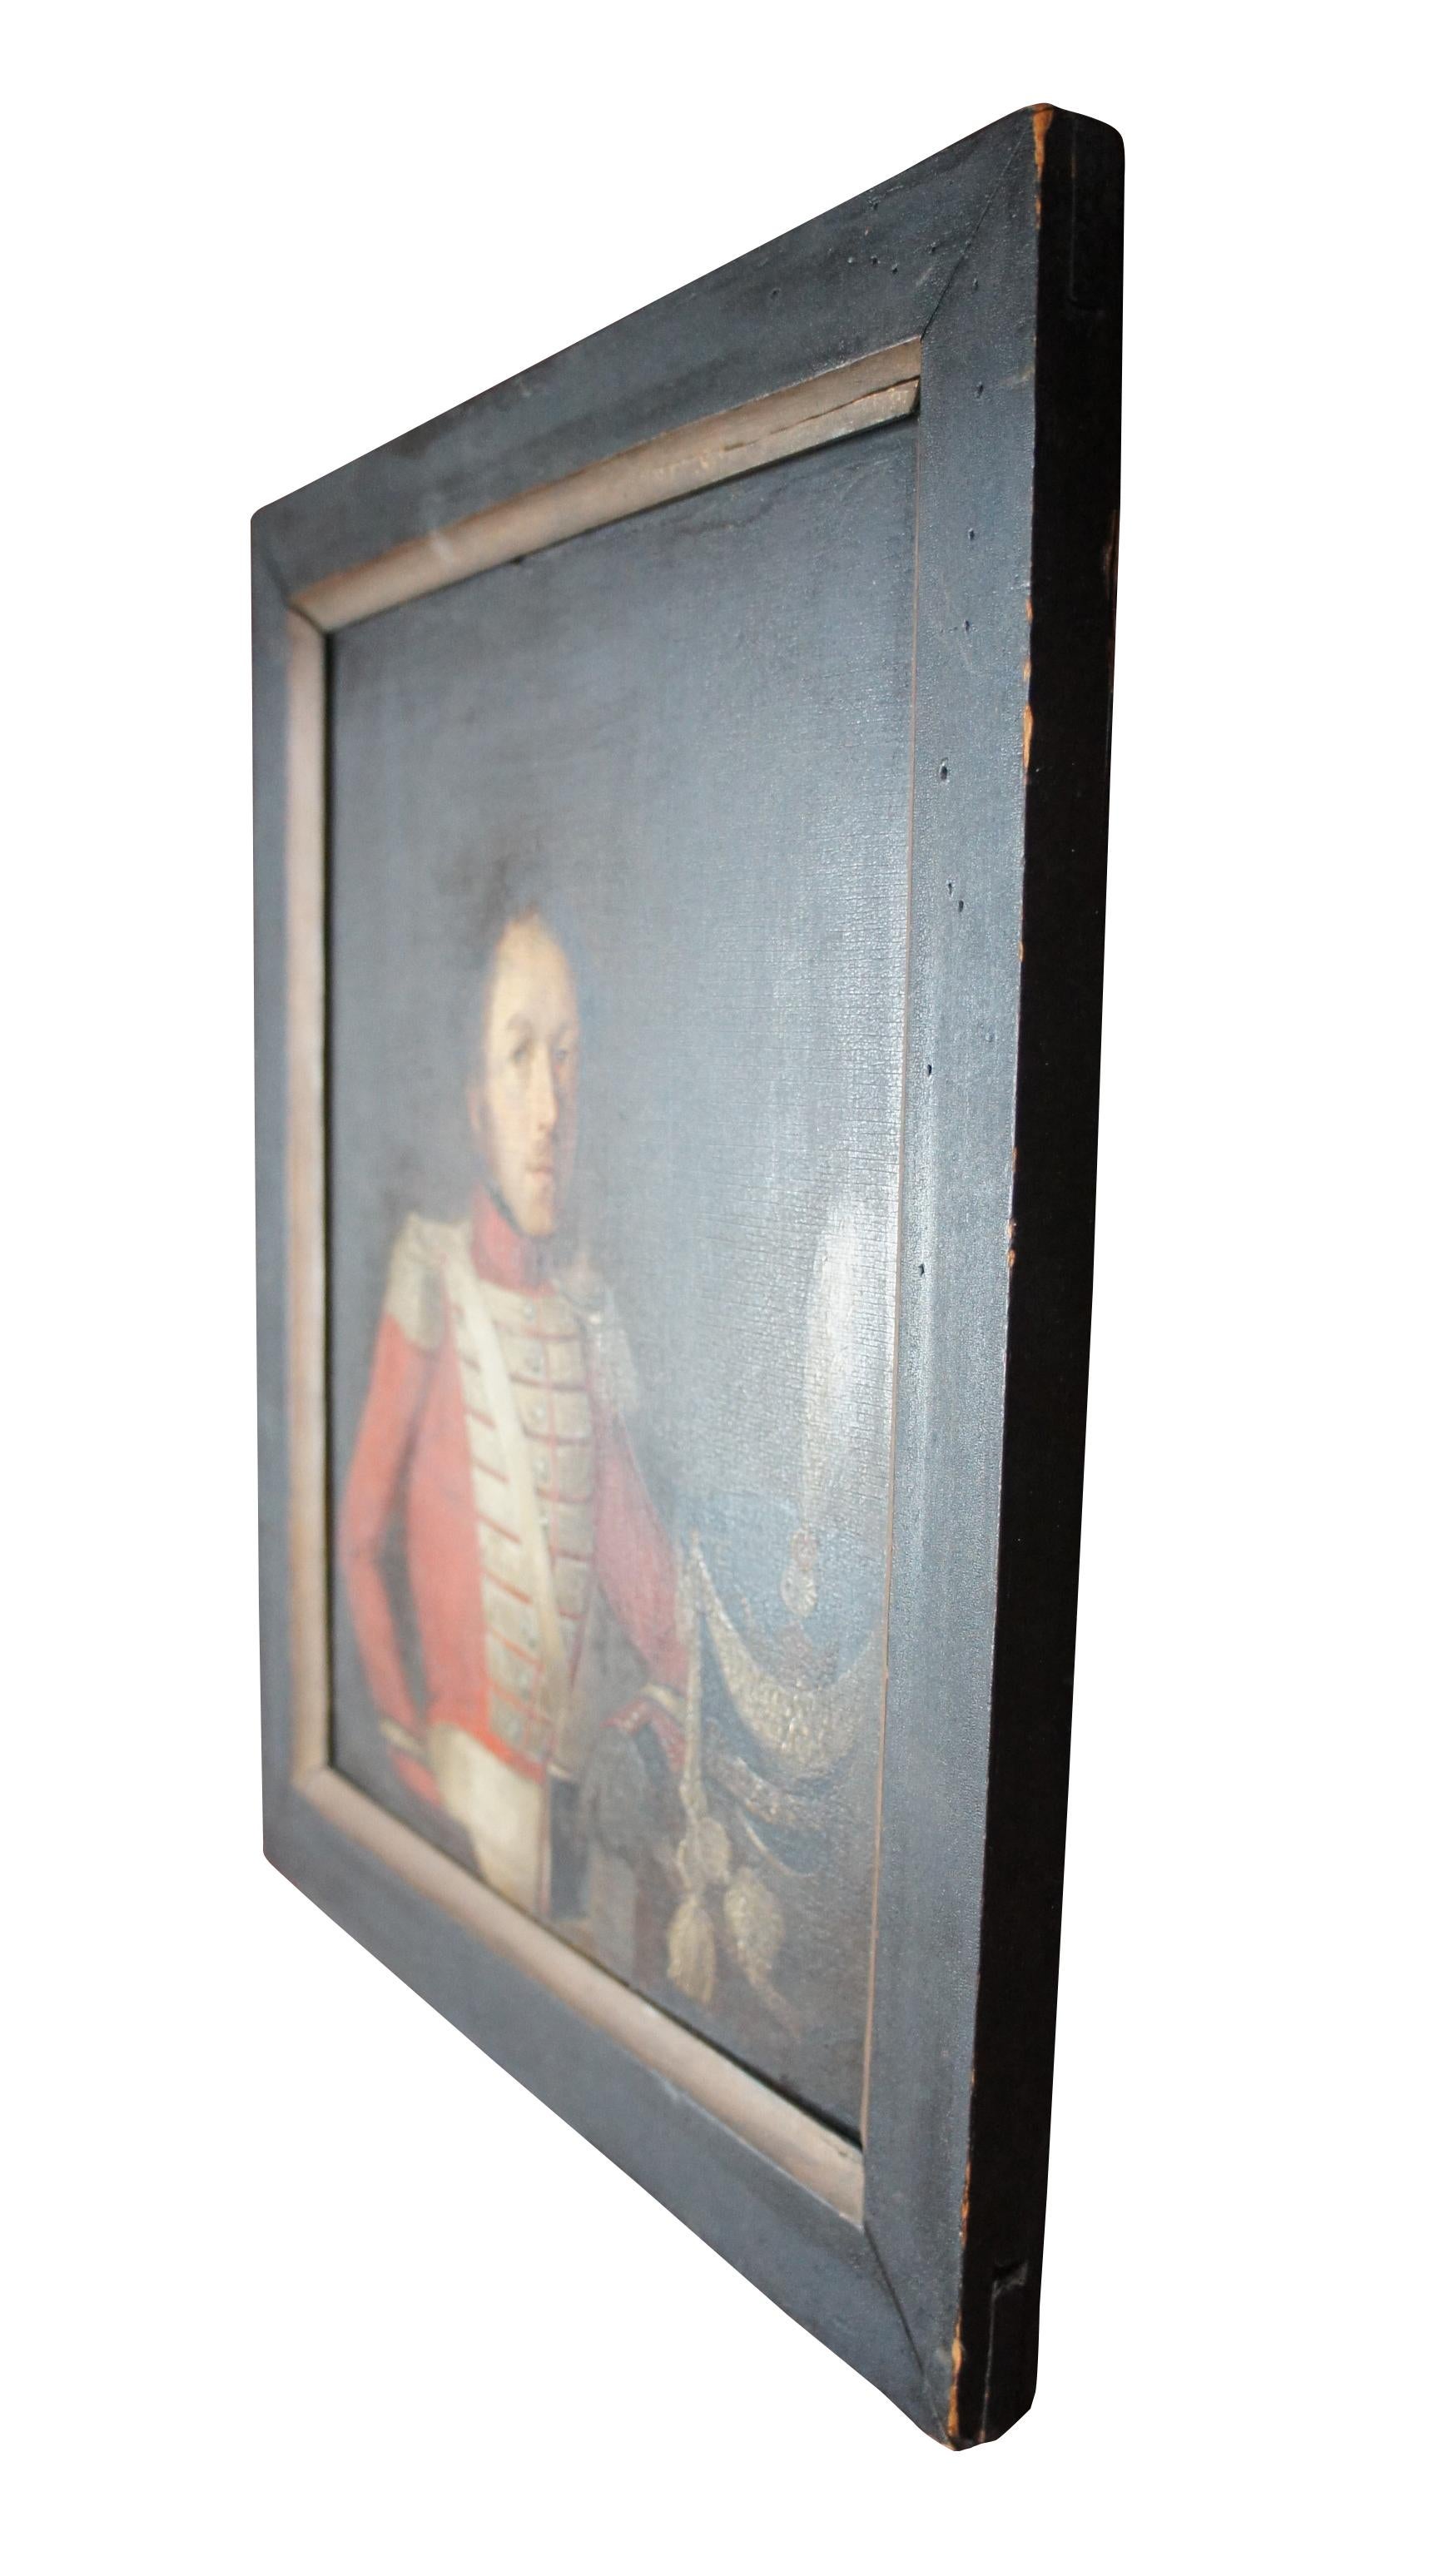 Antique French portrait oil painting on board of 27 year old Sergeant Heinrich Blumer. Painted in Paris during the 1830 July Revolution that brought Louis-Philippe to the throne of France. It shows the young man dressed in a Napoleonic style